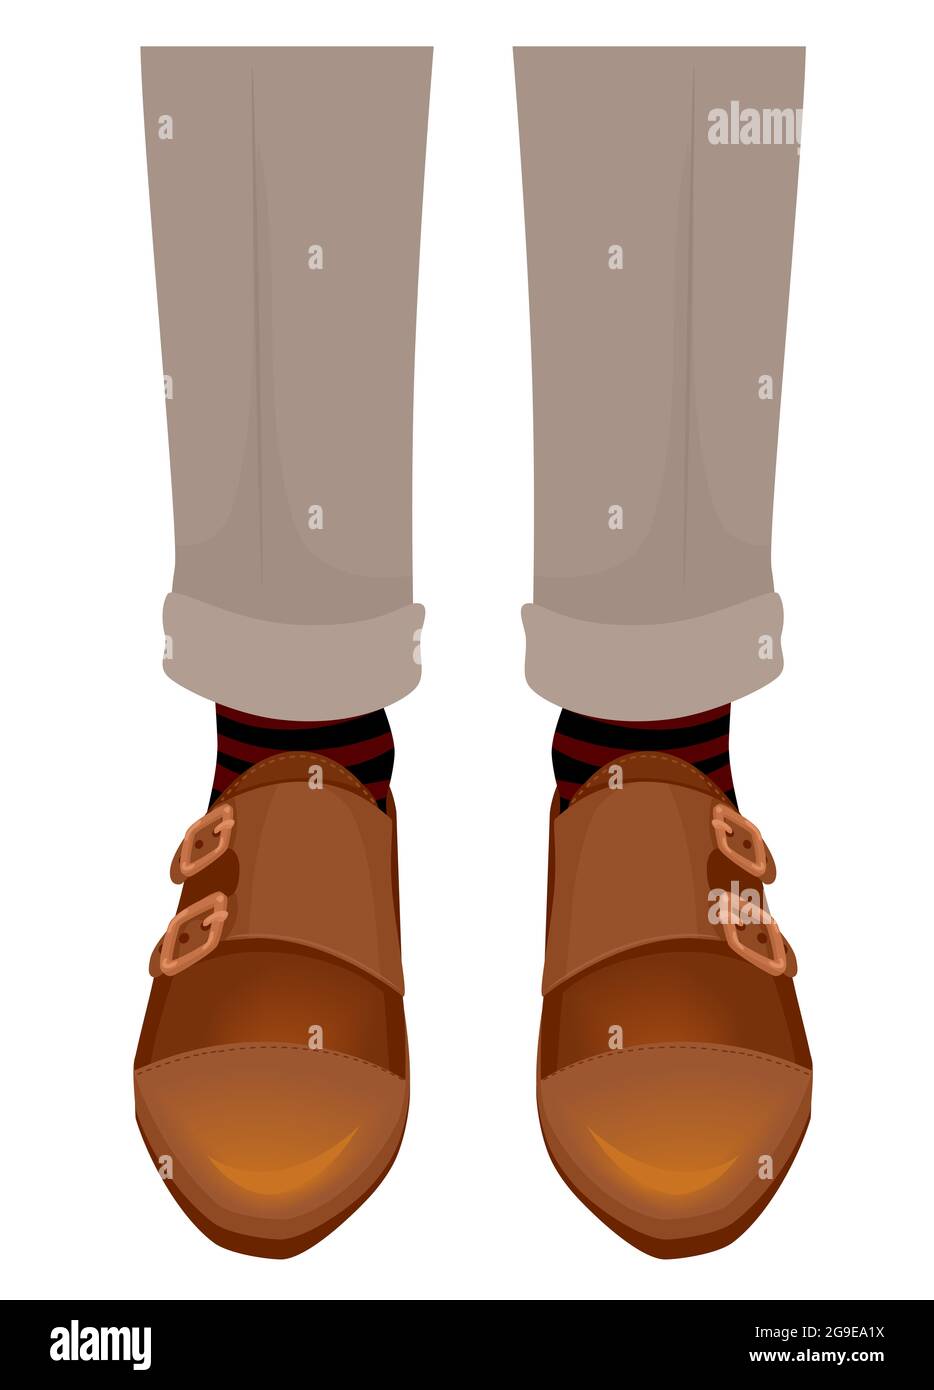 Illustration of a Man Feet and Legs Wearing Pants and Monk Strap Shoes Stock Photo